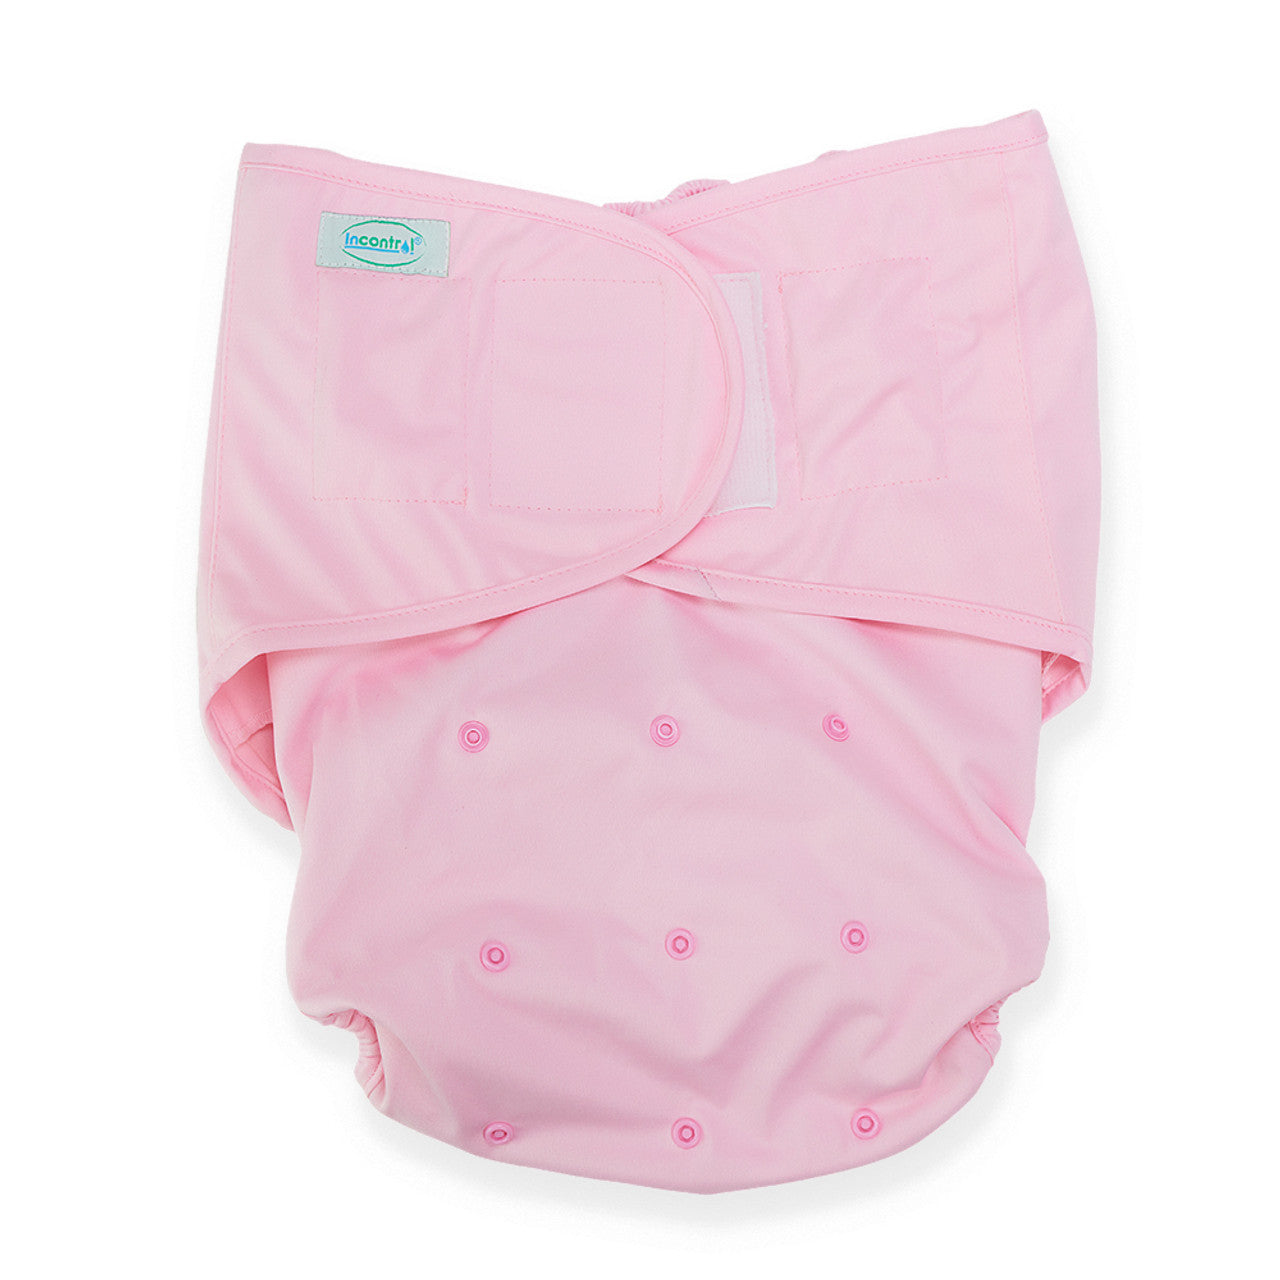 InControl - Adult Diaper Cover/Wrap - Pink